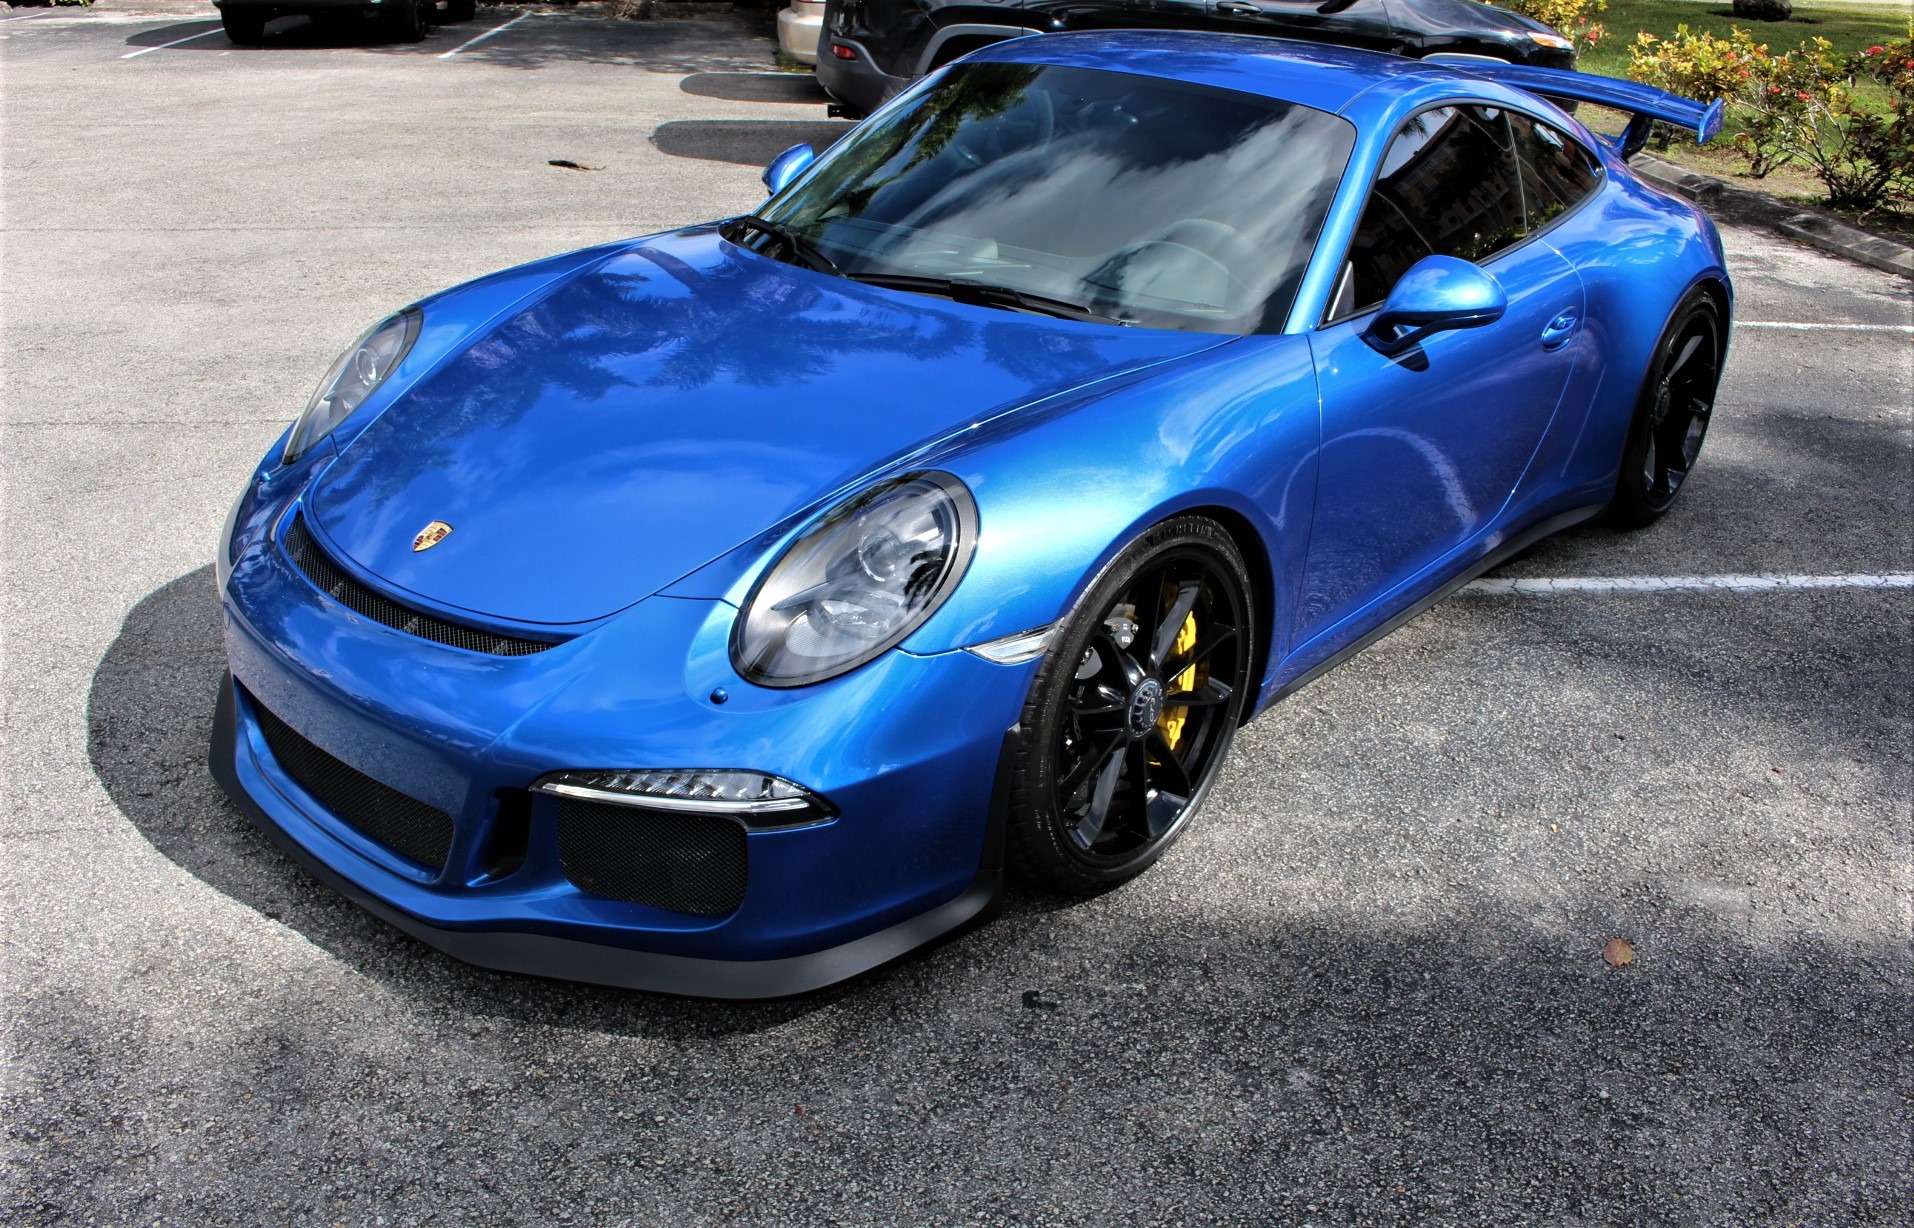 Used 2014 Porsche 911 GT3 for sale Sold at The Gables Sports Cars in Miami FL 33146 3